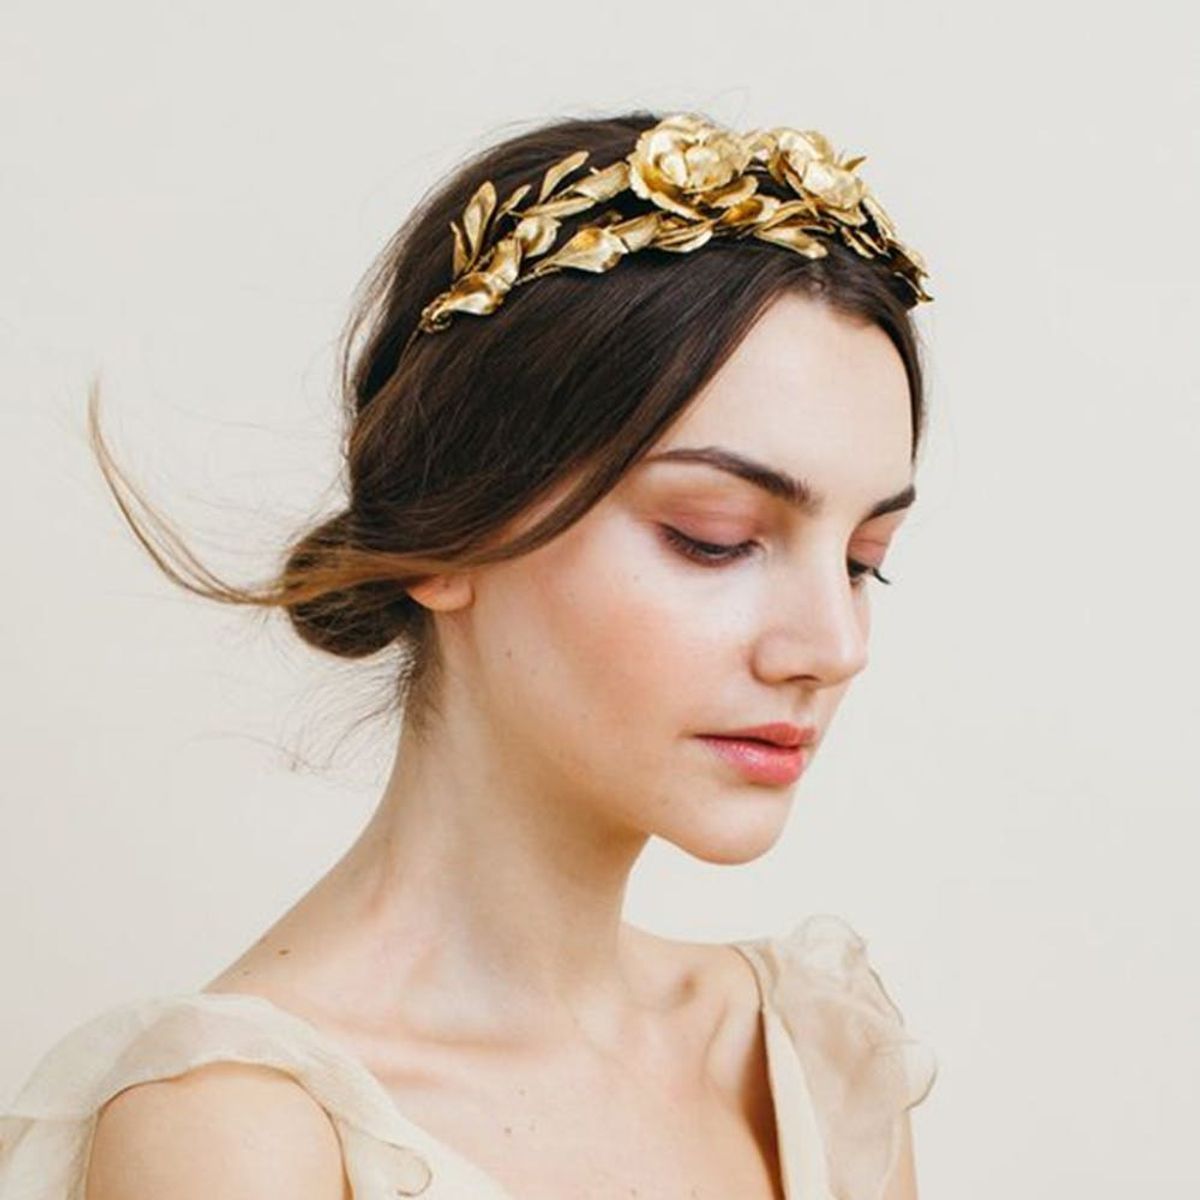 11 Festival Headbands Perfect for Your Spring or Summer Wedding